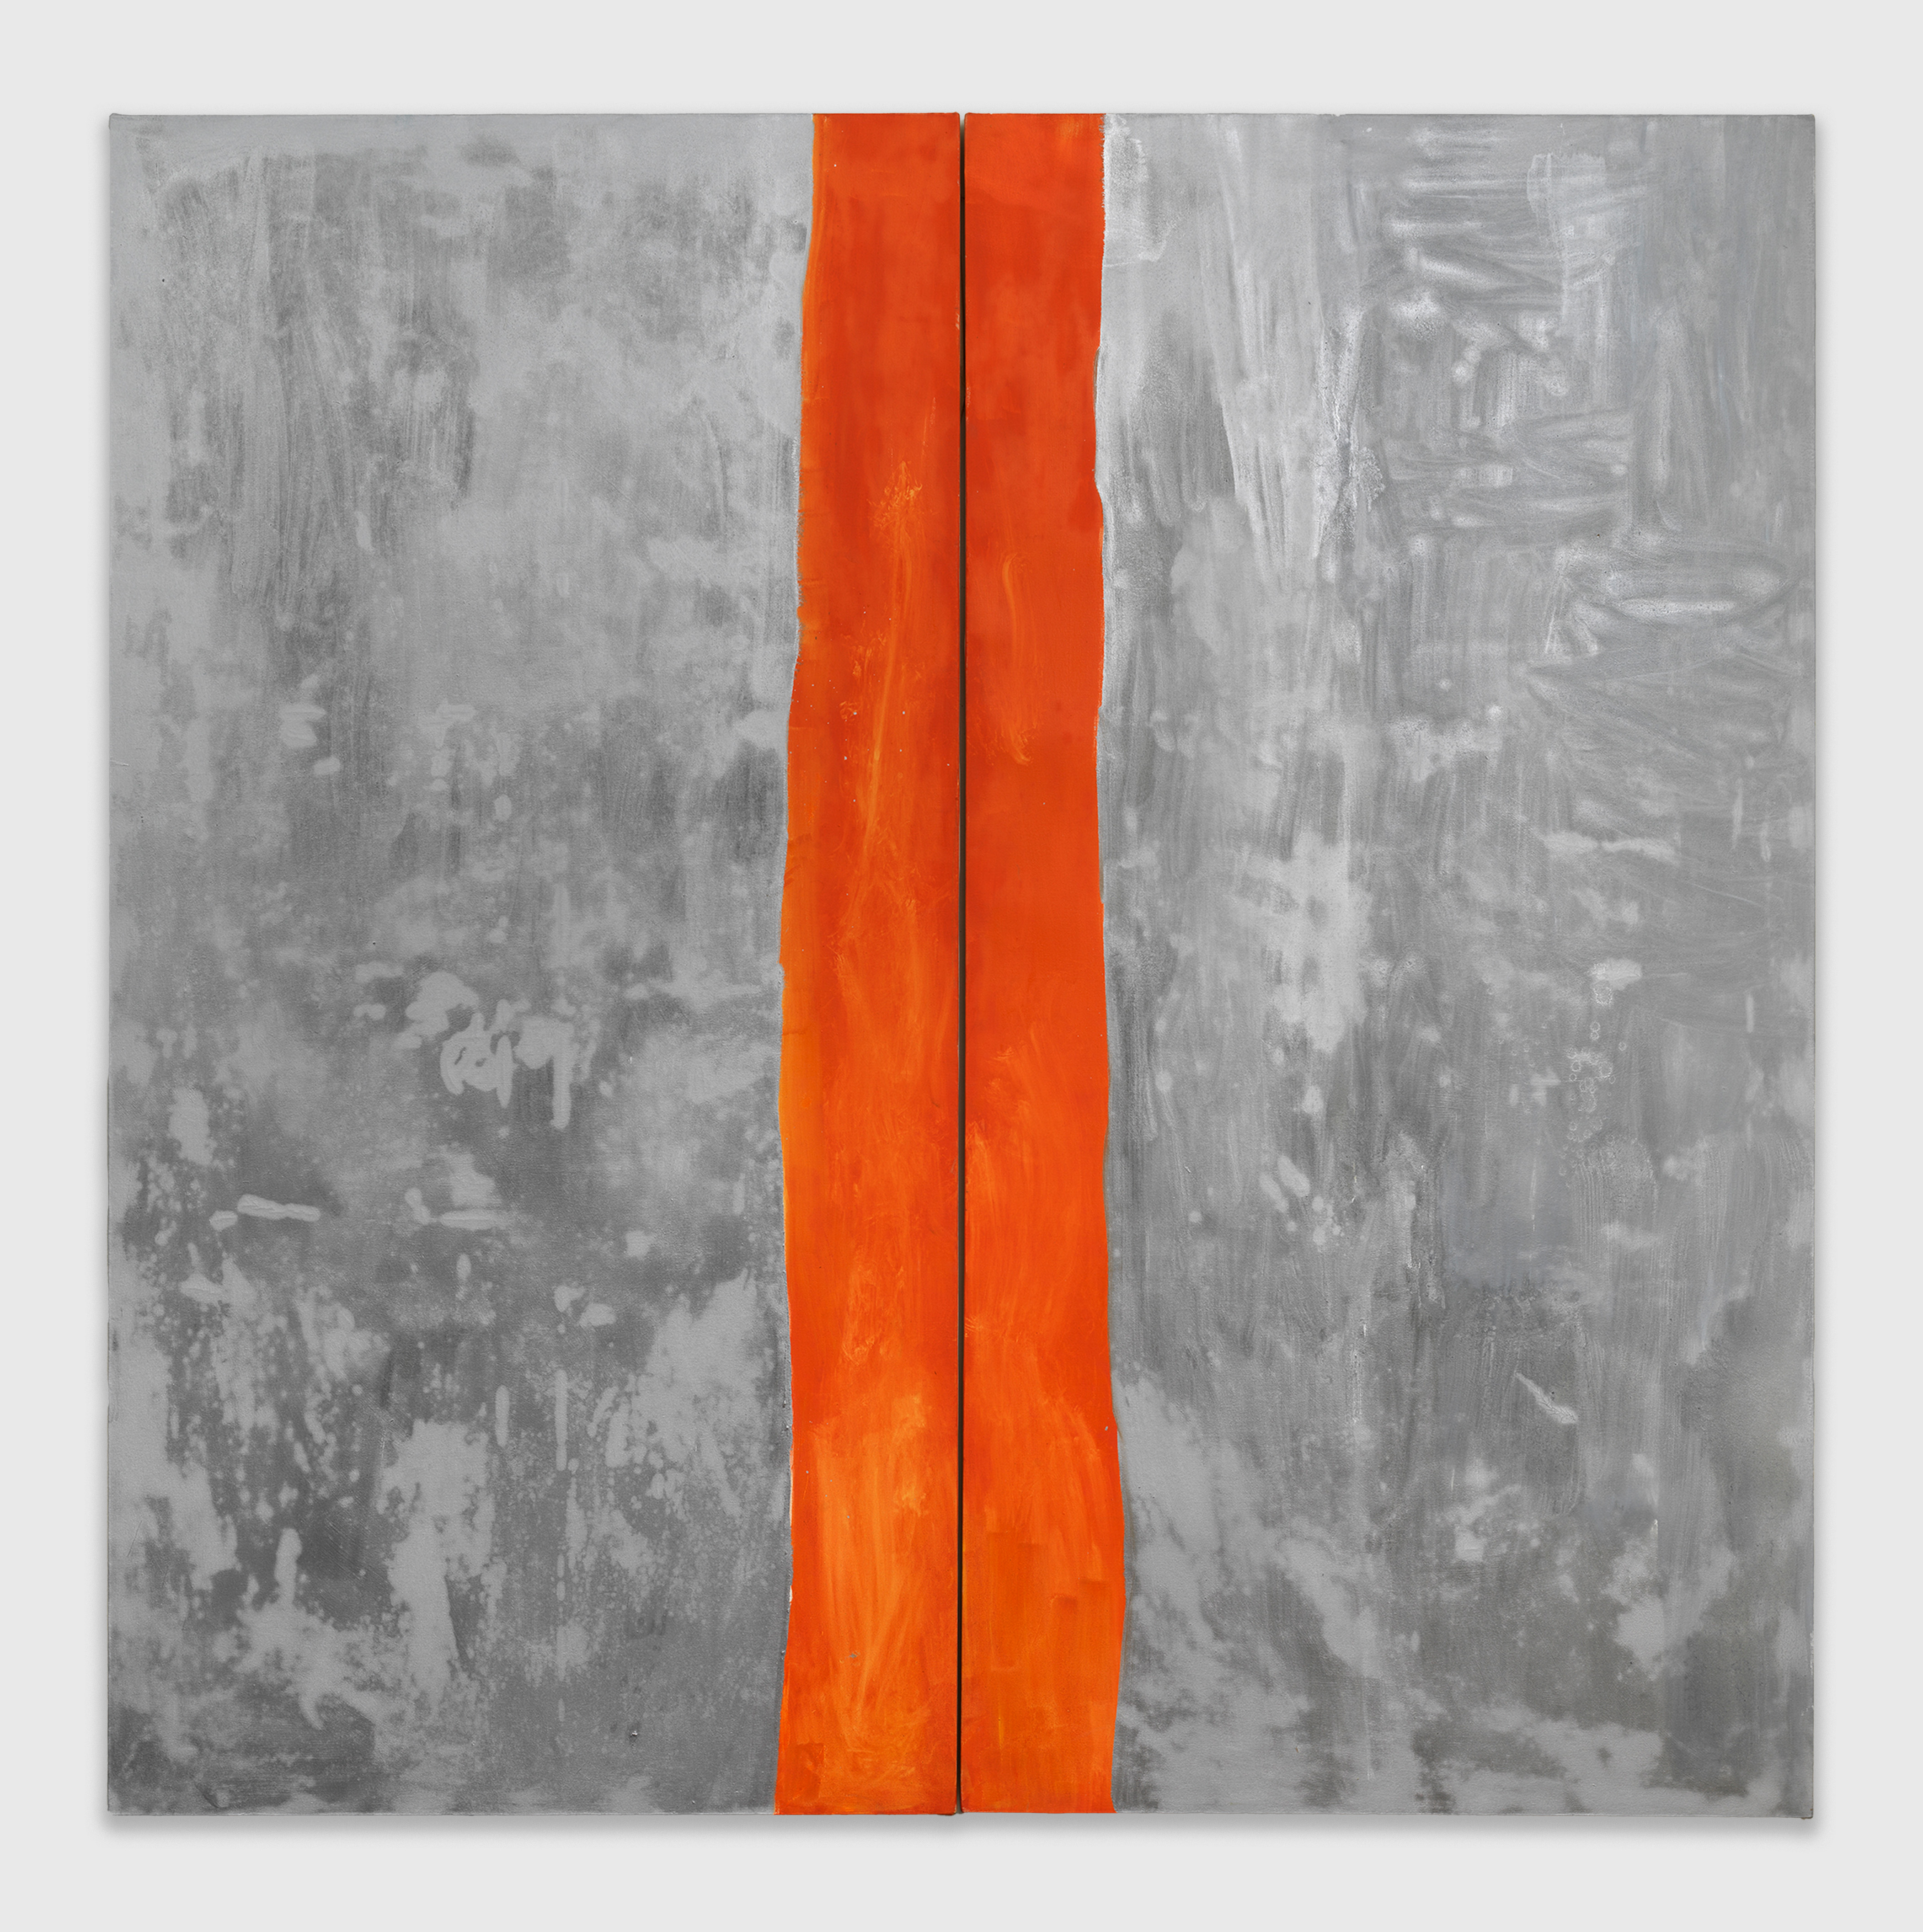 Jane Swavely, Silver OID #4, 2022, Oil on canvas, 90 x 90 in.